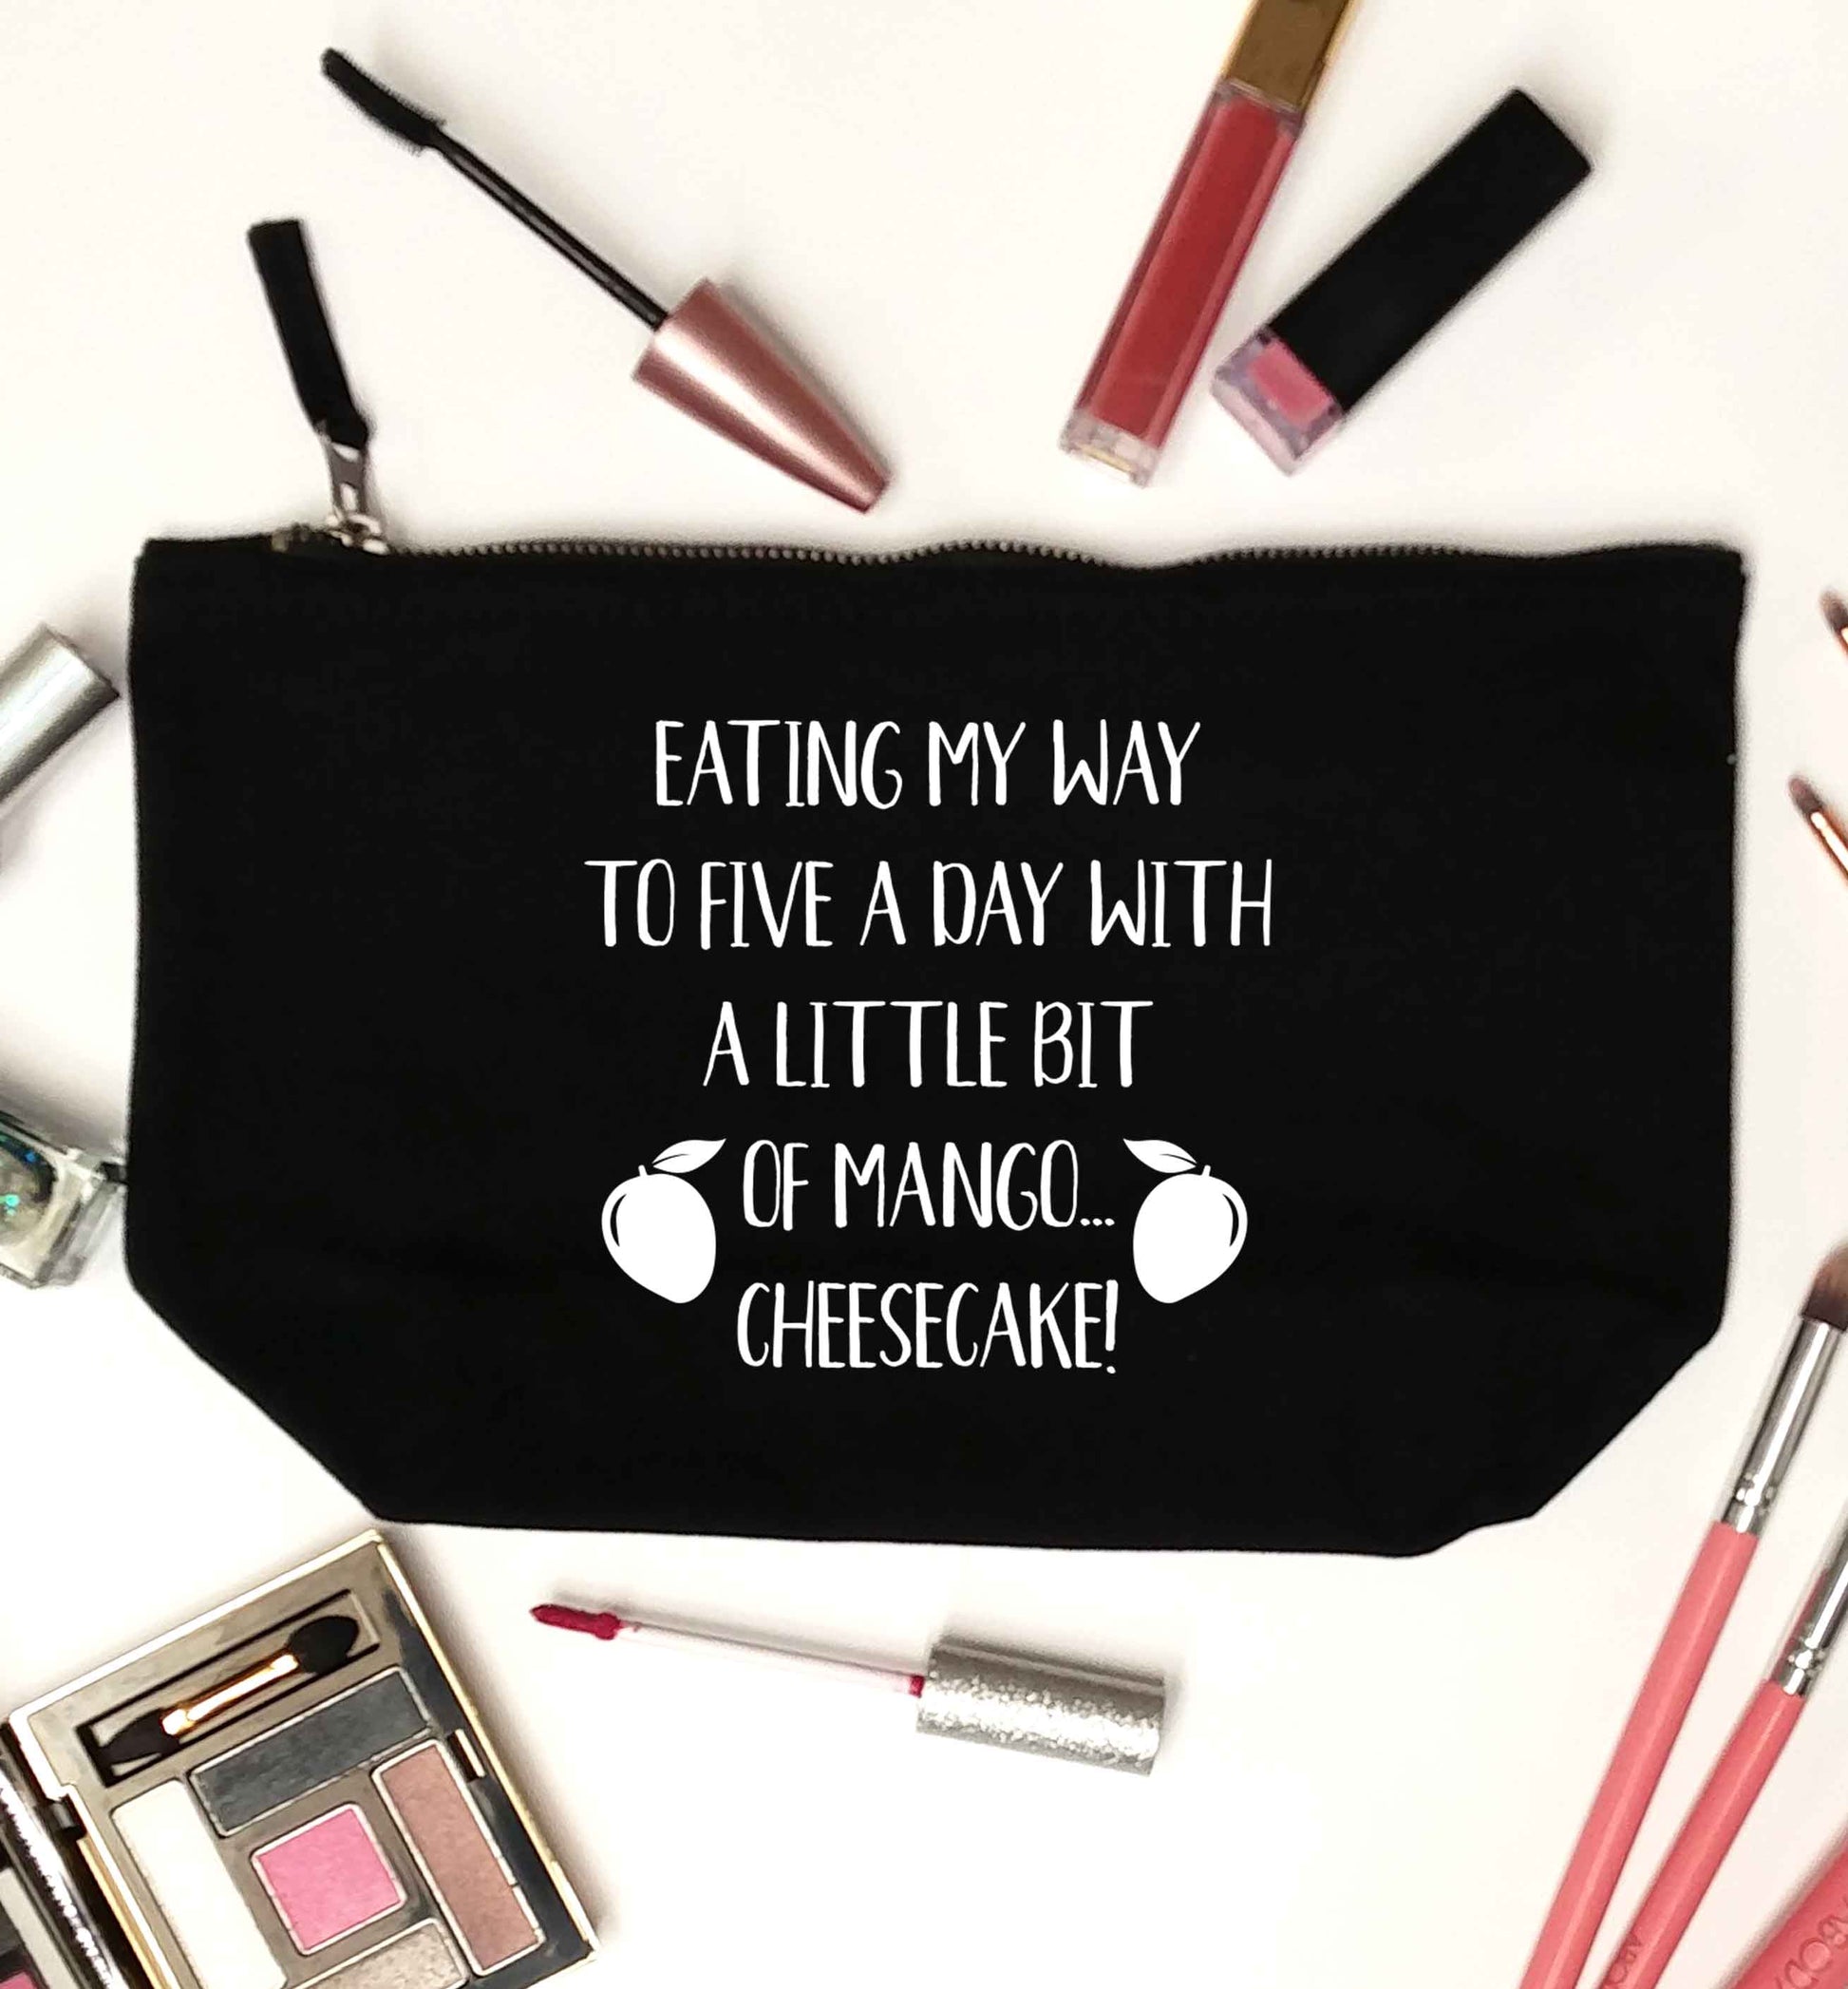 Eating my way to five a day with a little bit of mango cheesecake black makeup bag